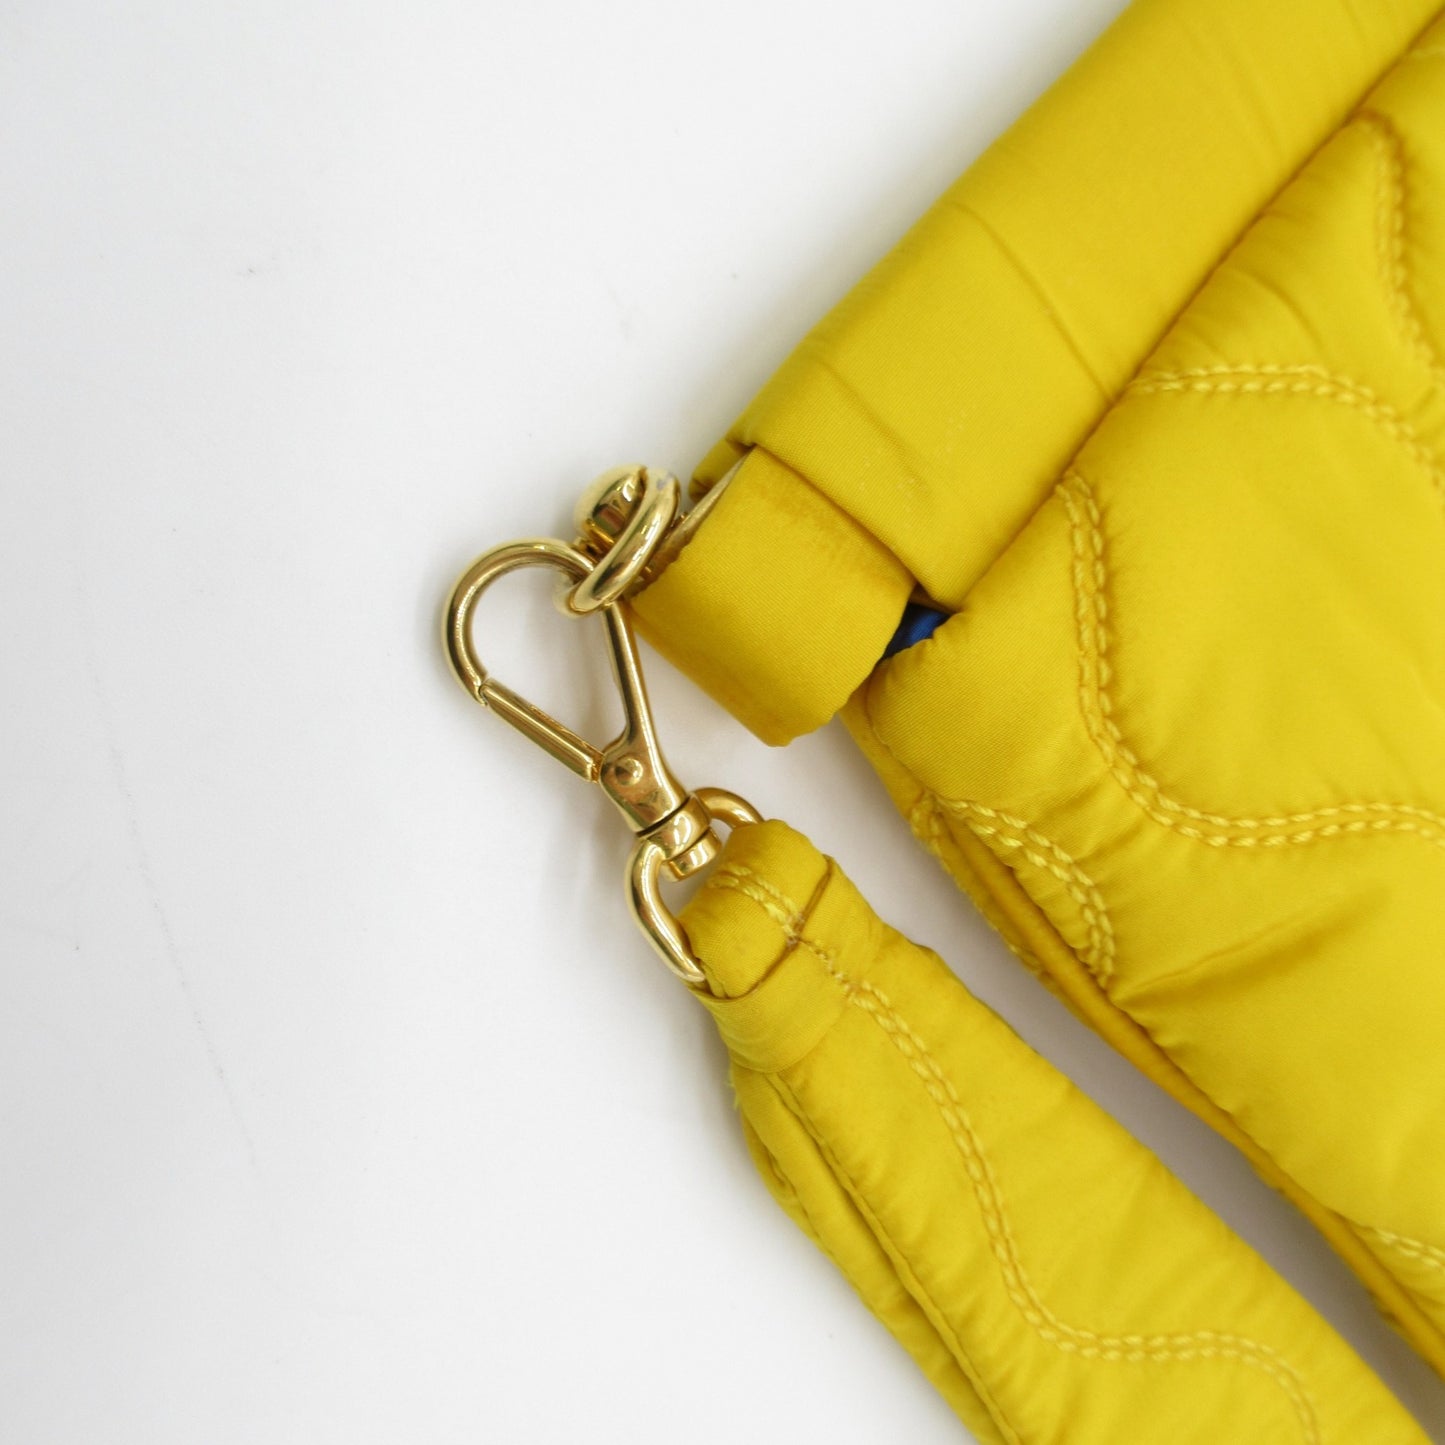 Miu Miu Women's Exquisite Synthetic Yellow Clutch from Renowned Designer in Yellow